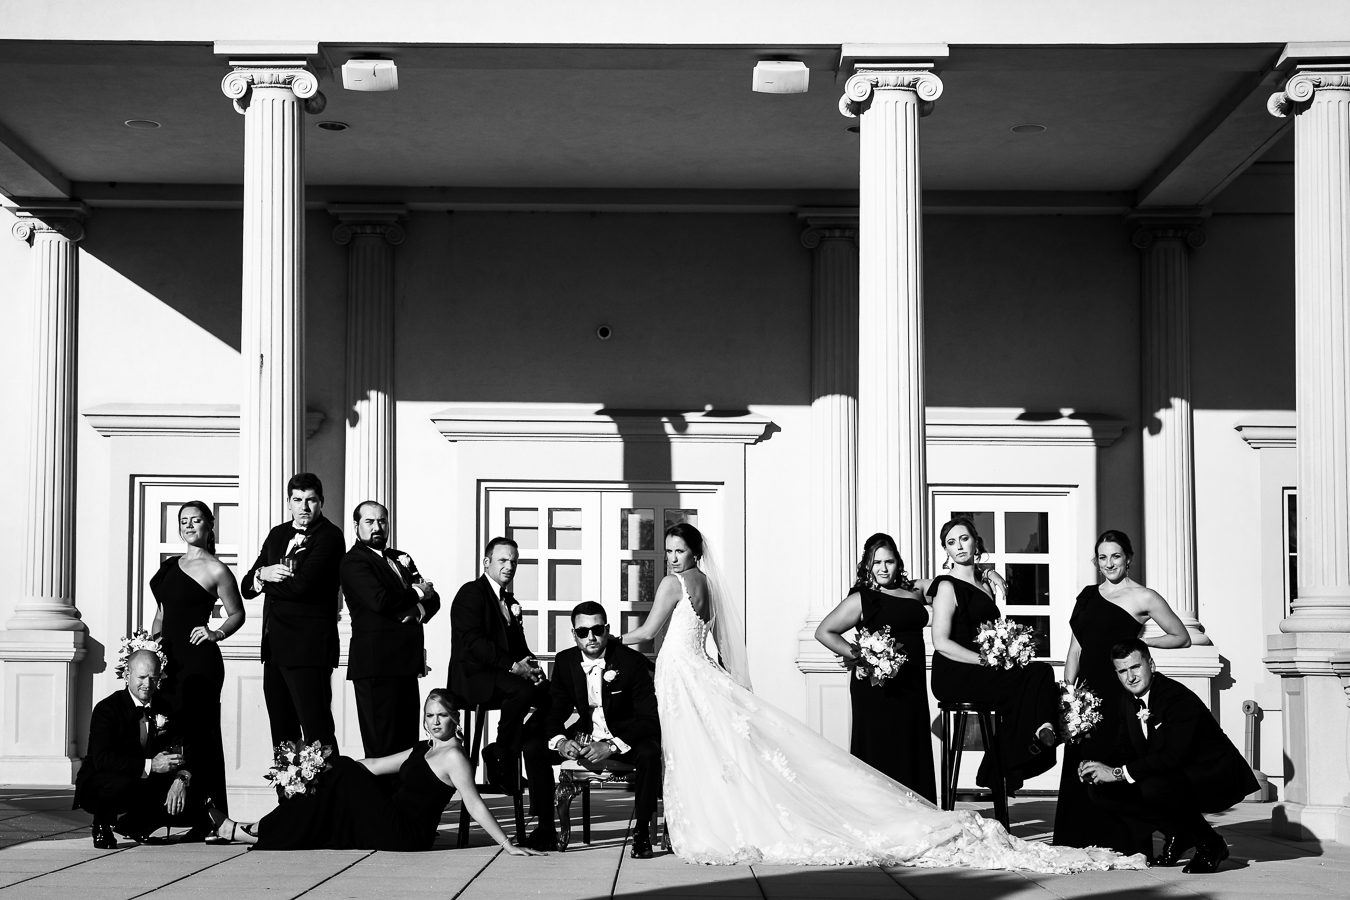 luxury nj wedding photographer, lisa rhinehart, captures this black and white vogue wedding party shot of the bride and groom and their wedding party posing in front of the palace at somerset park during before their black and gold wedding ceremony 